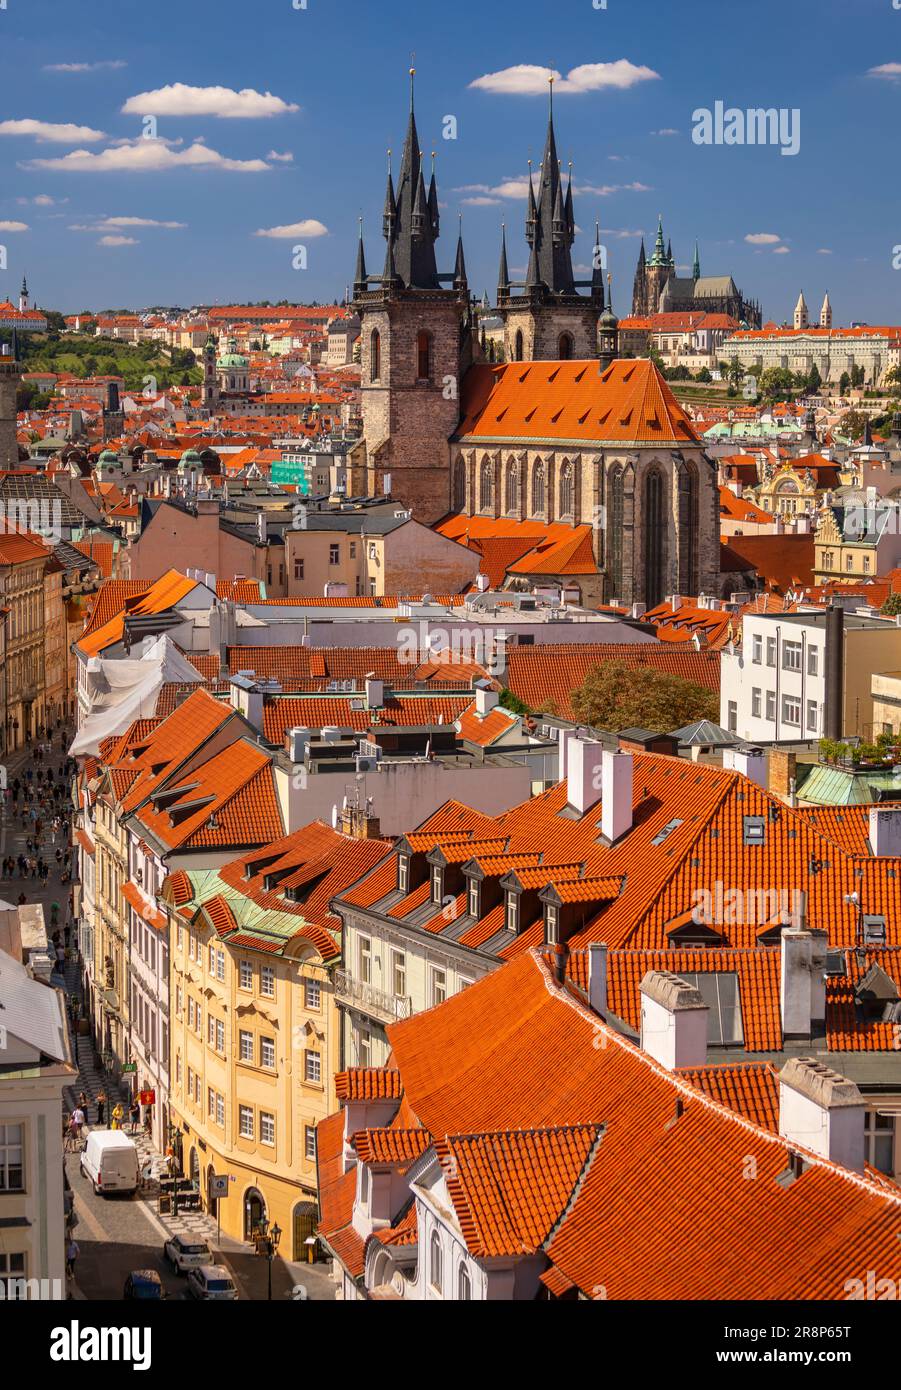 PRAGUE, CZECH REPUBLIC, EUROPE - Prague skyline including Church of Our Lady Before Tyn, and in distance St. Vitus Cathedral and Prague Castle. Stock Photo